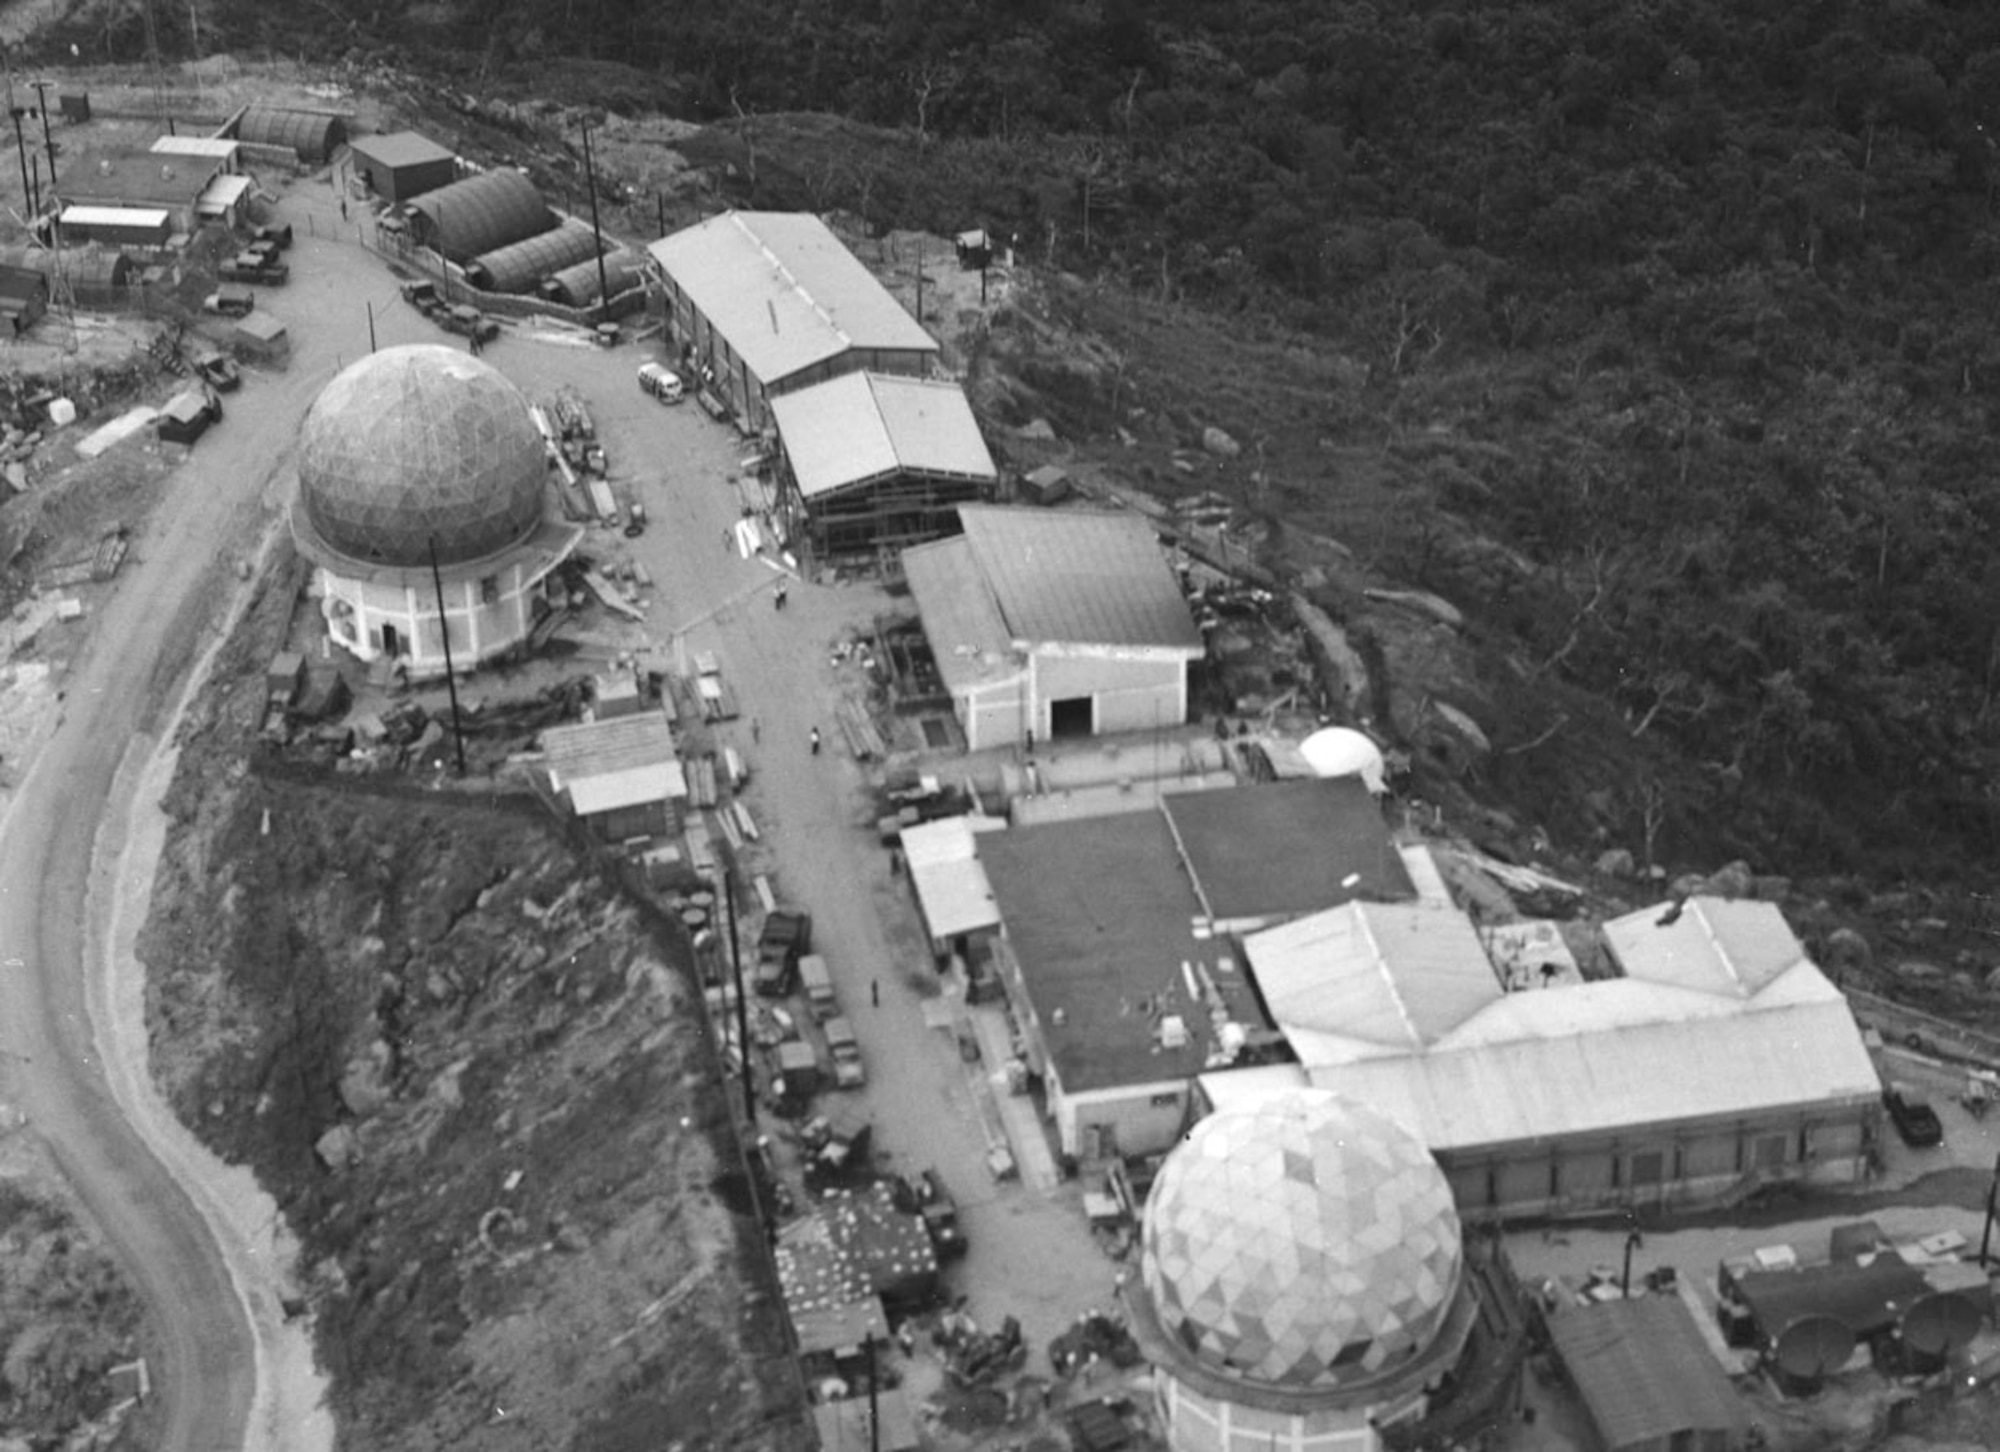 The Air Force had two ground-based signals intelligence intercept sites at Danang, South Vietnam -- one at the air base and another, pictured here, on nearby “Monkey Mountain.” (U.S. Air Force photo)